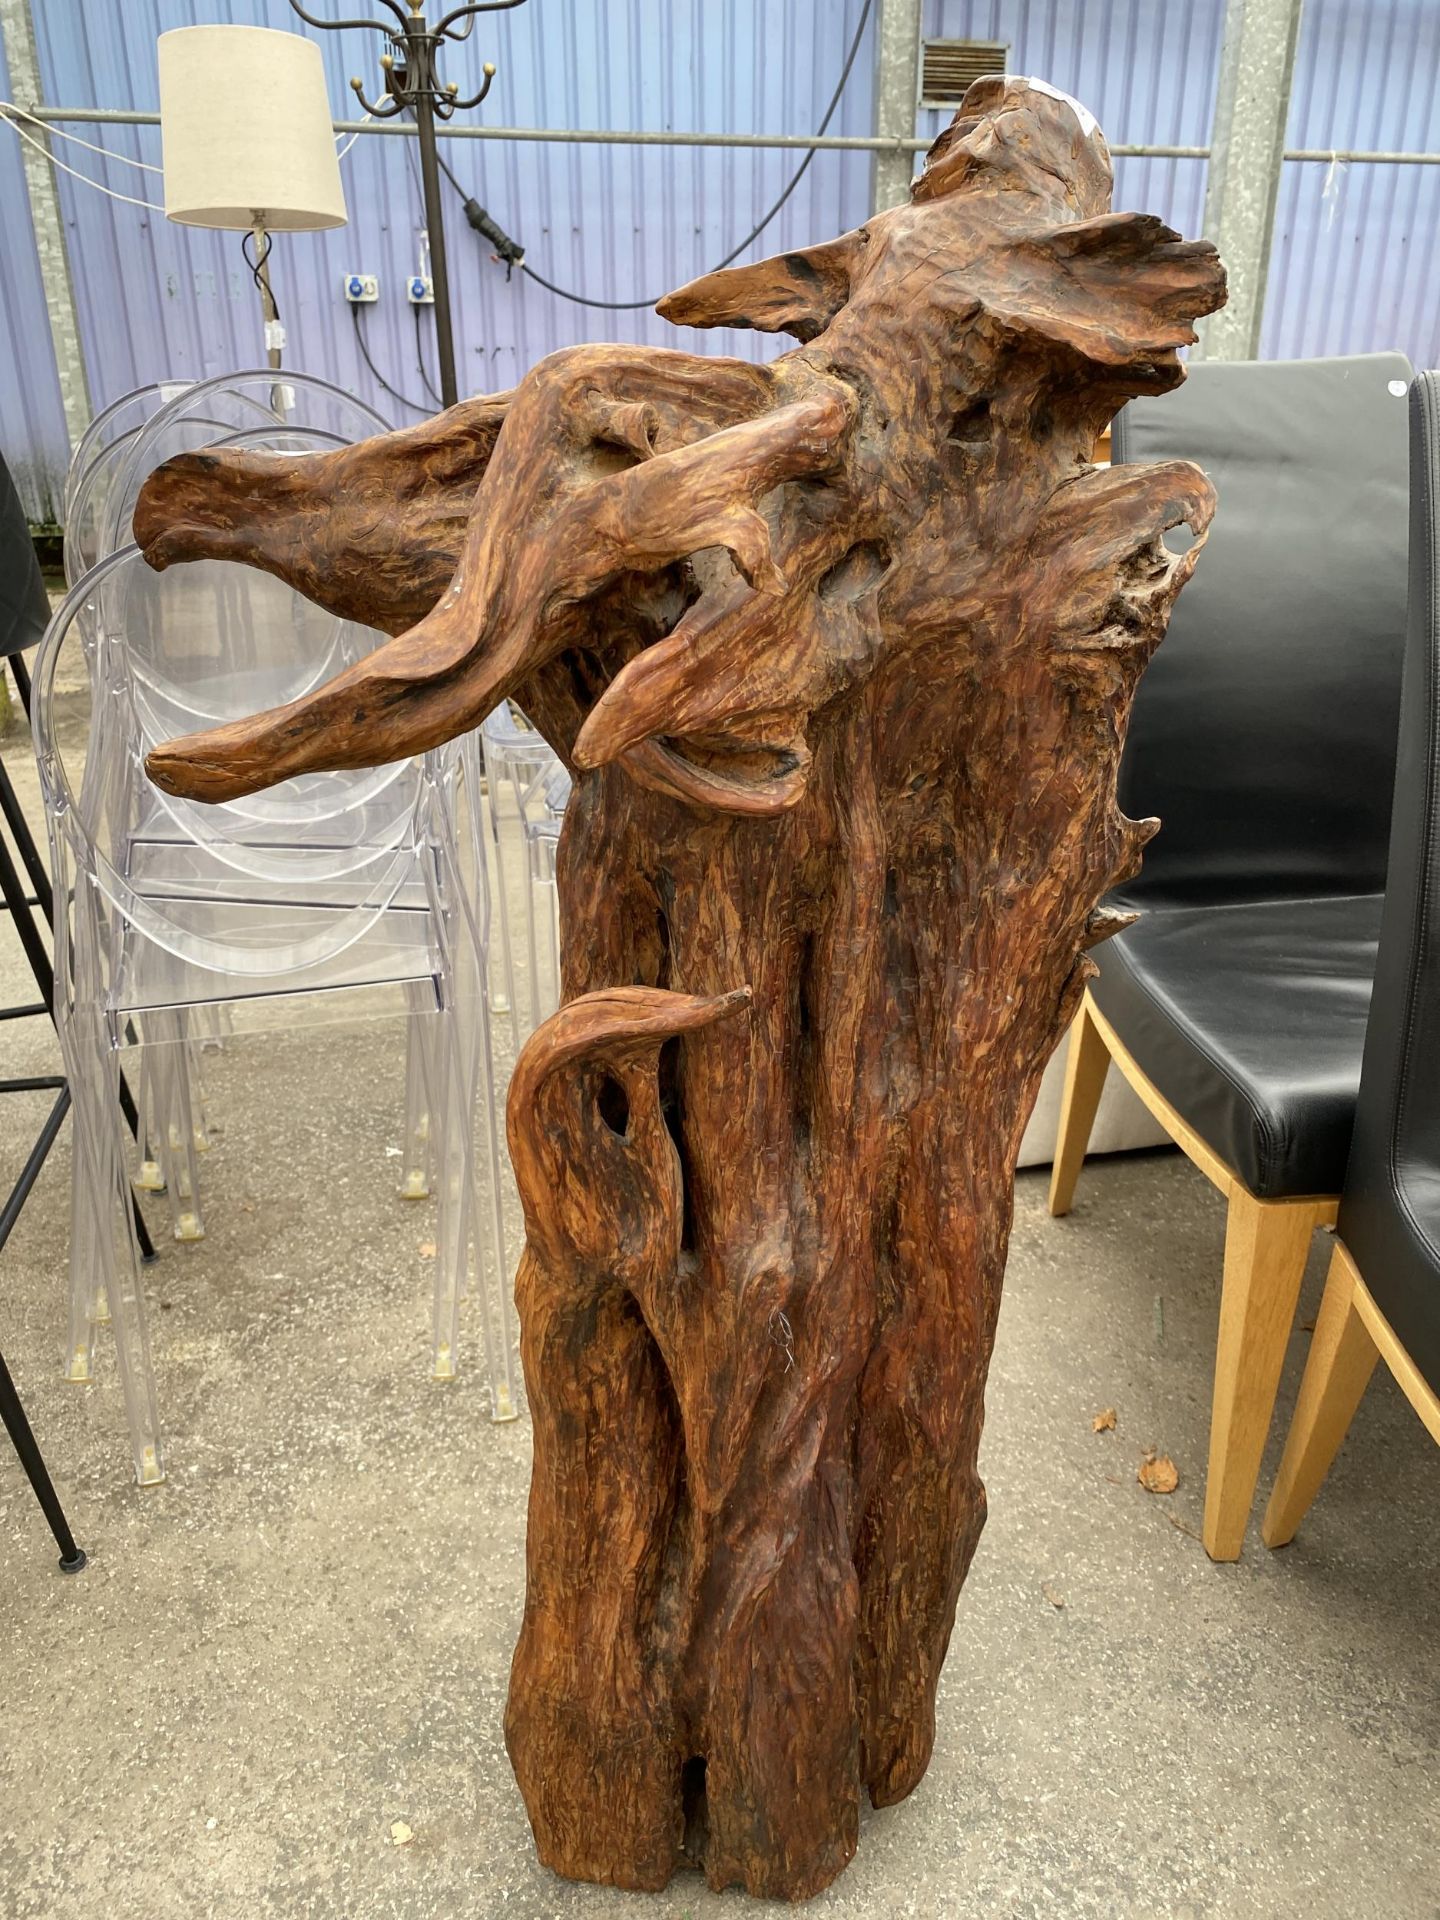 A LARGE IRISH BOGWOOD ART SCULPTURE, 46" HIGH AND 27" ACROSS MAX - BELIEVED TO BE 5000 - 10000 YEARS